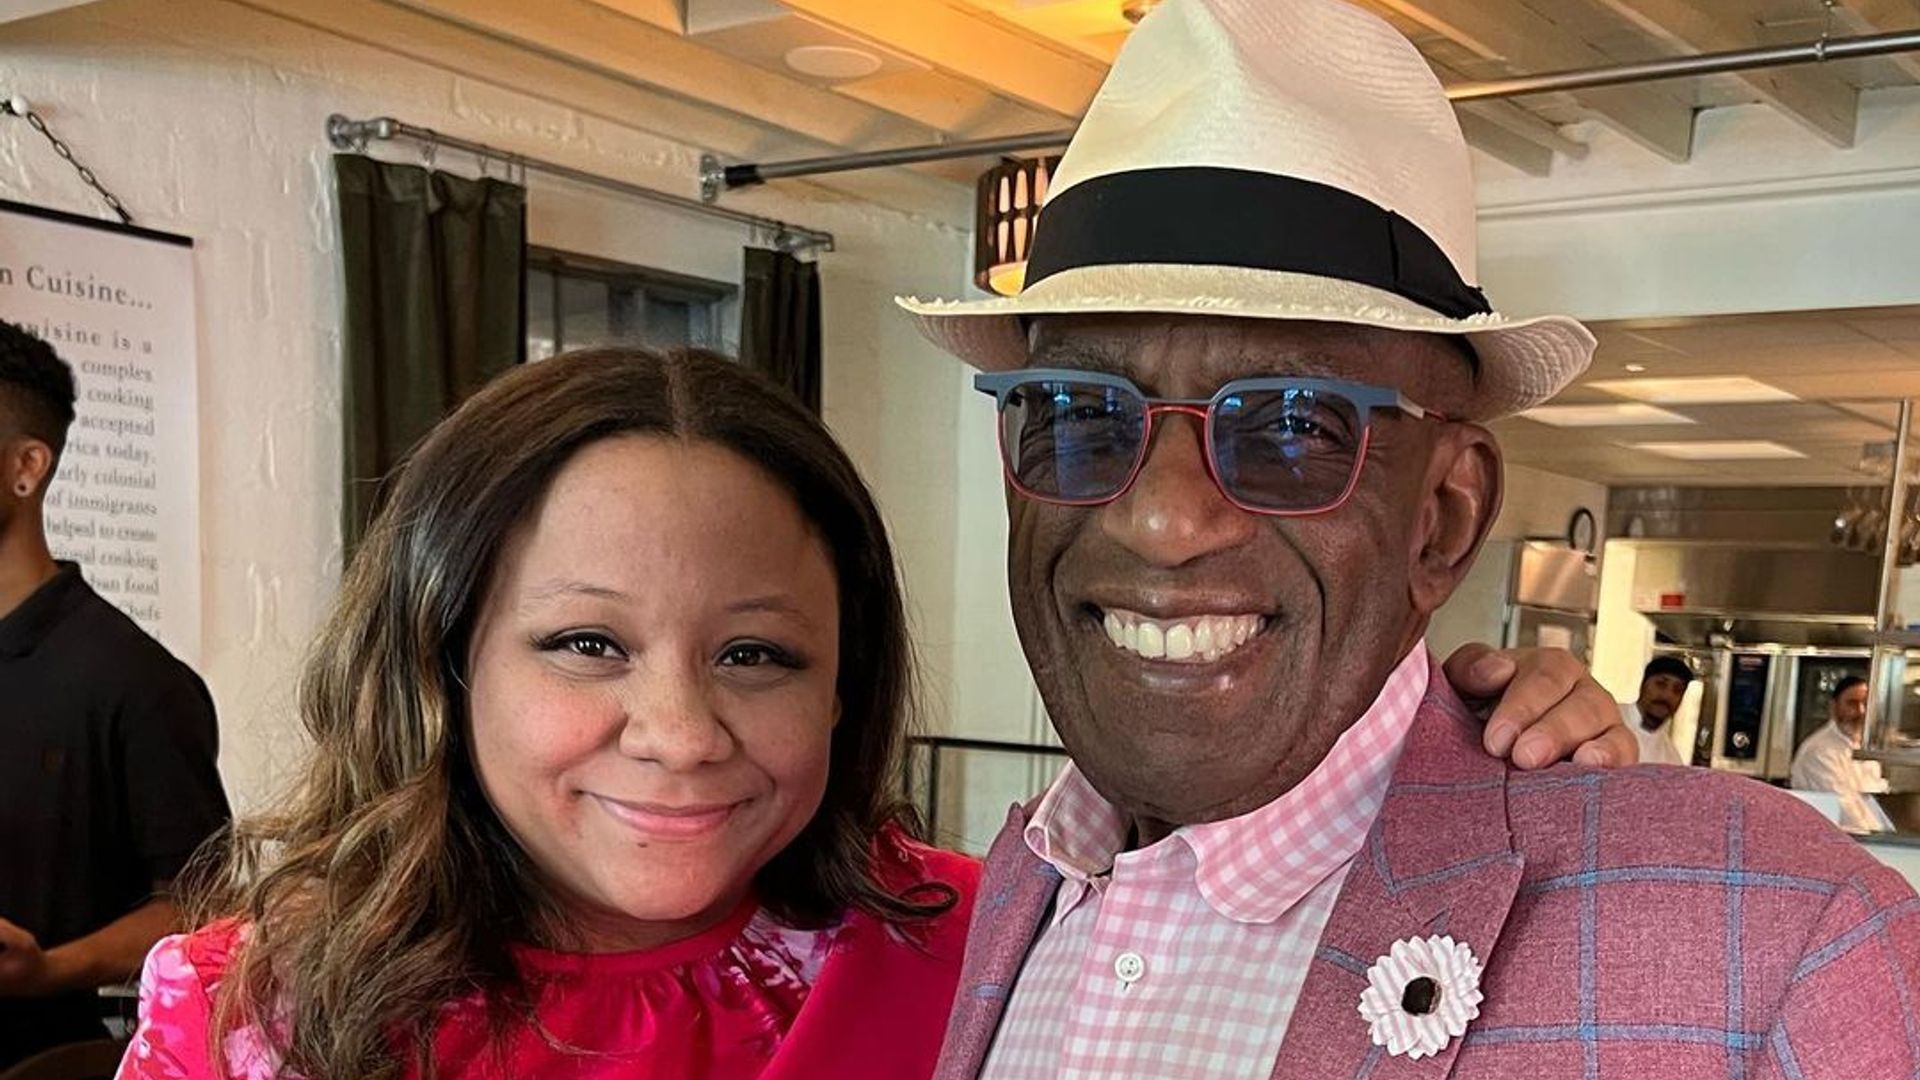 Al Roker with daughter Courtney